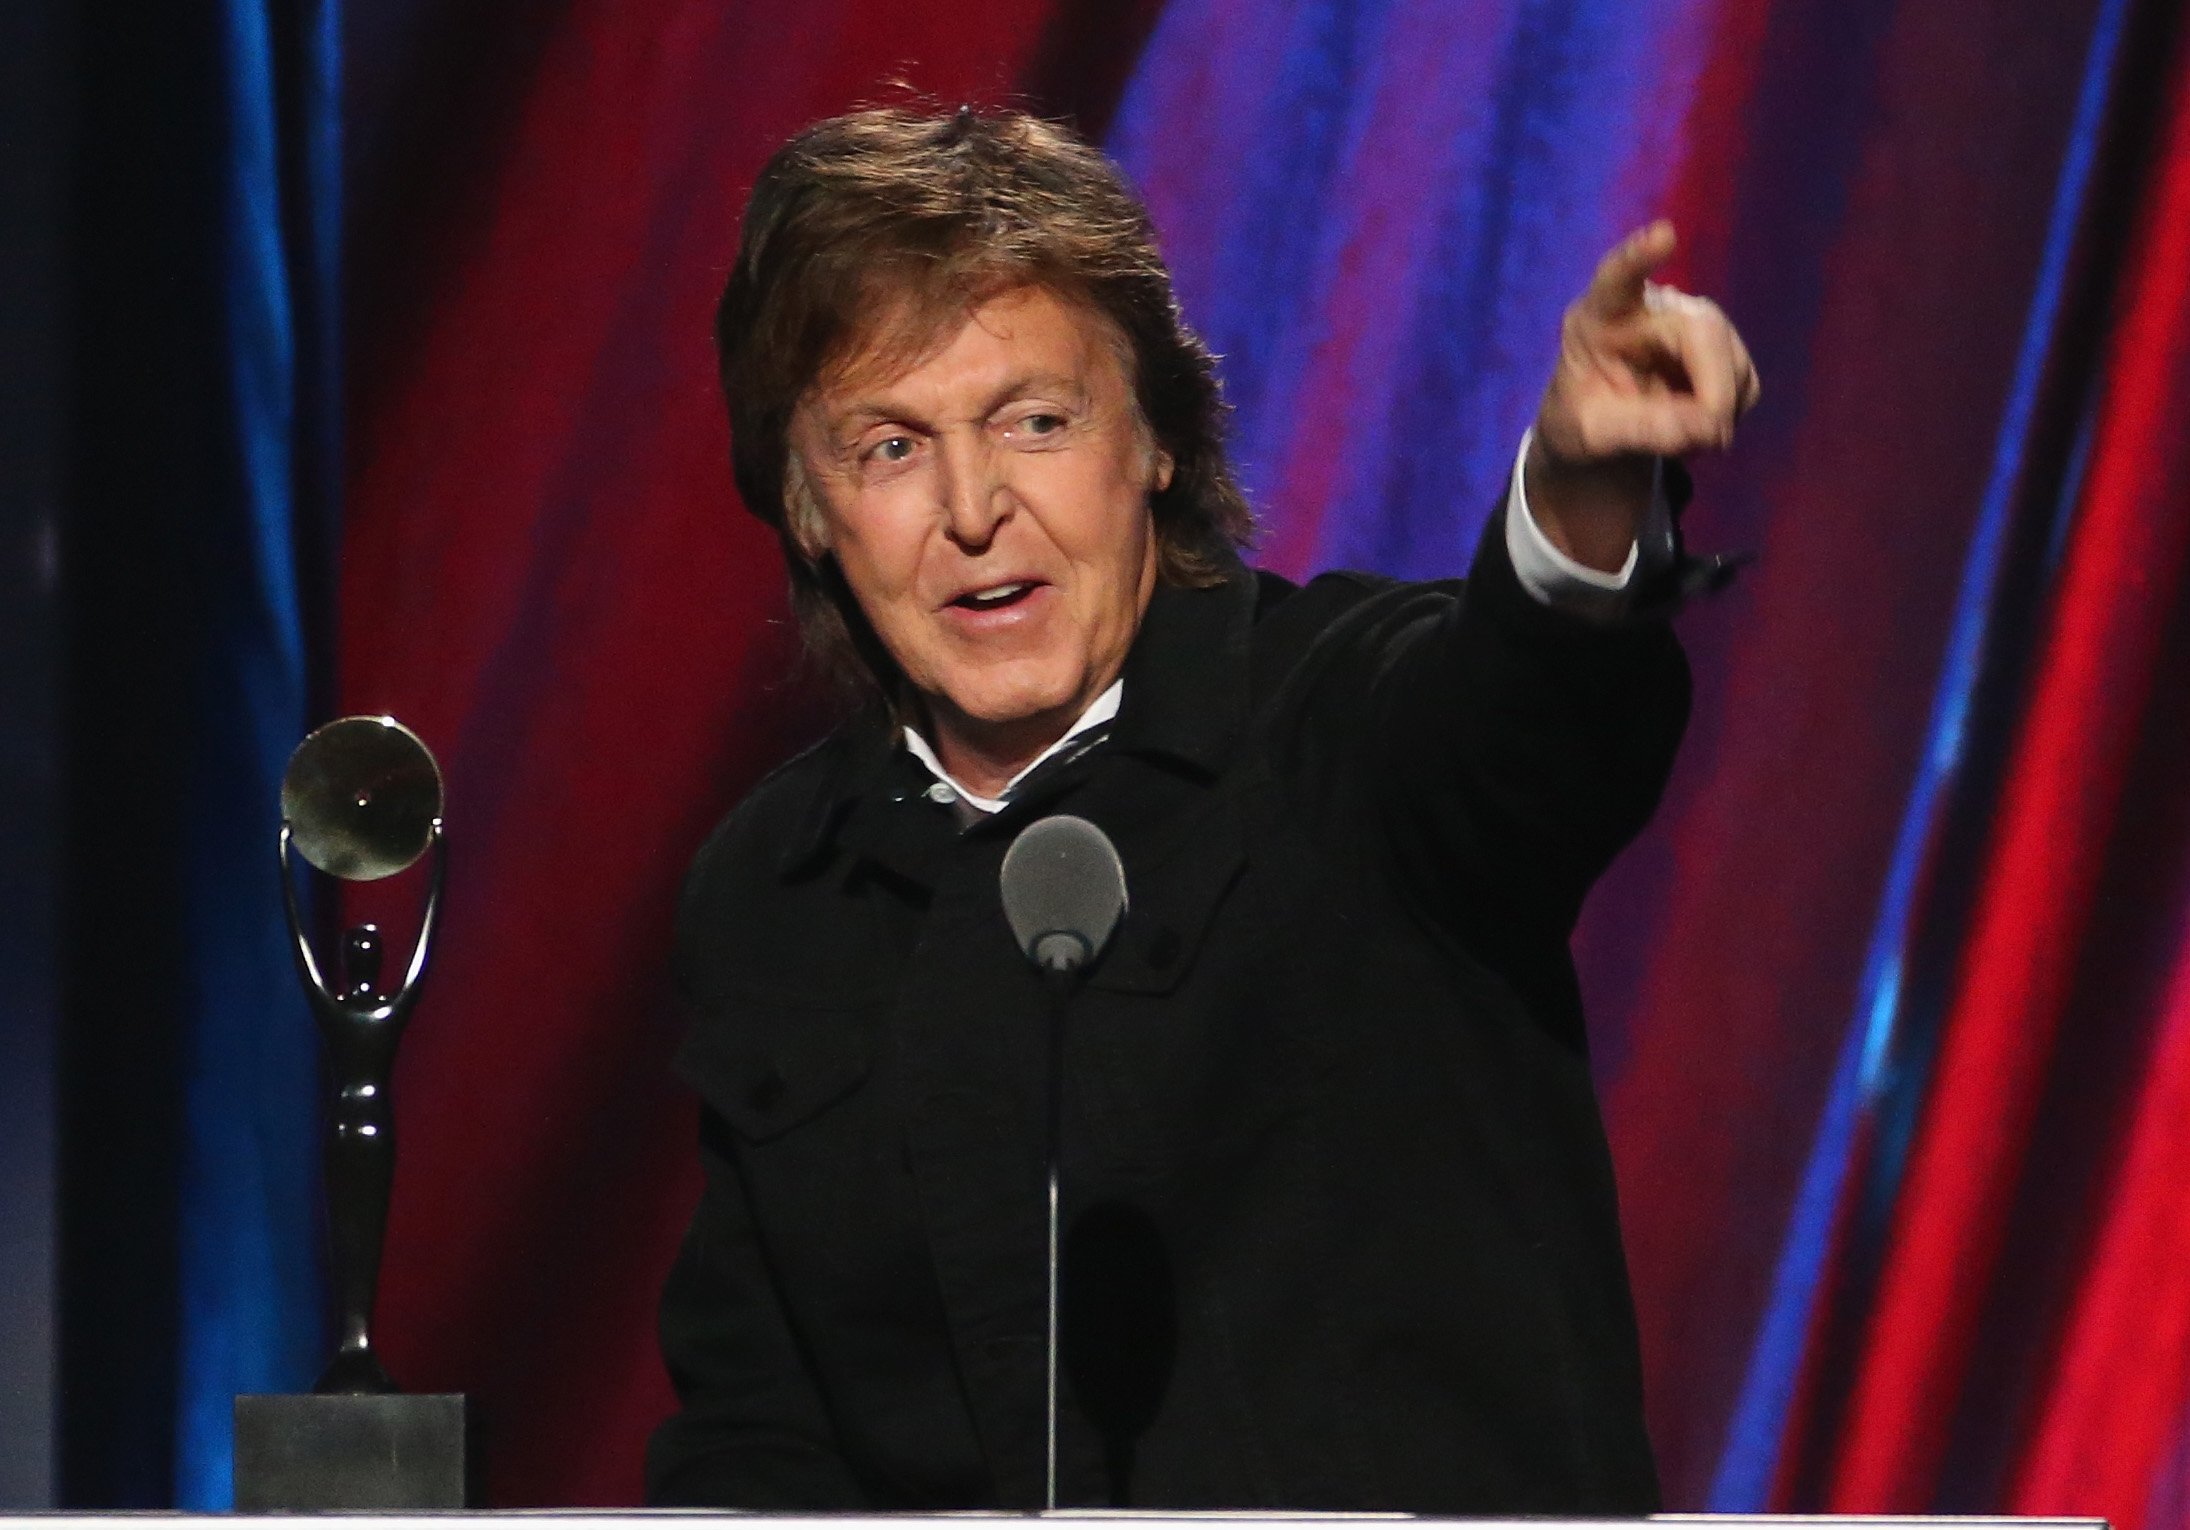 Paul McCartney onstage during the 30th Annual Rock and Roll Hall of Fame Induction Ceremony